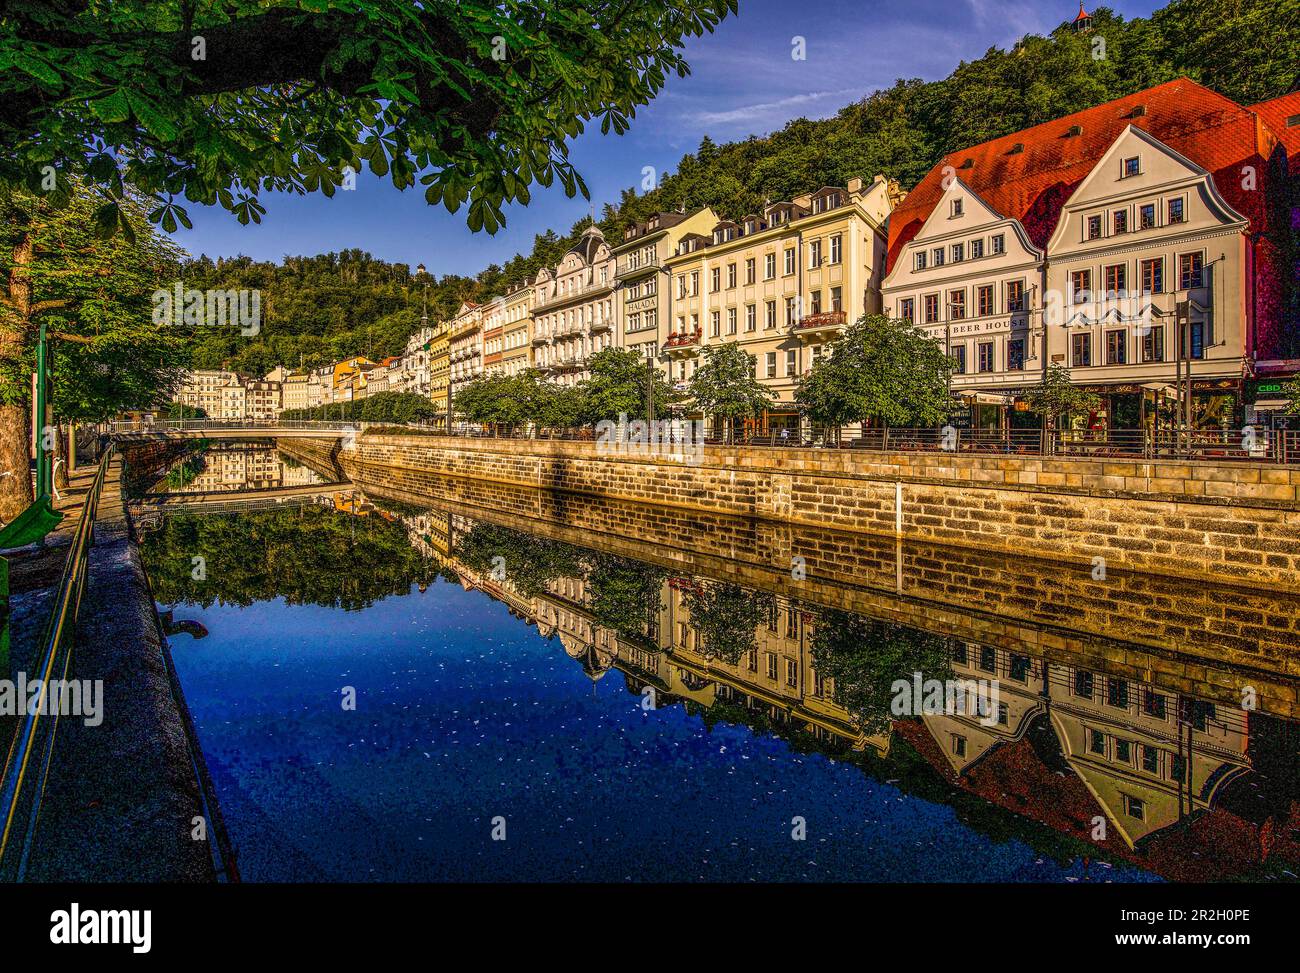 Town houses at the Tepl (Tepla), Old Meadow (Stará Louka) in Karlovy Vary, Karlovy Vary, Czech Republic Stock Photo